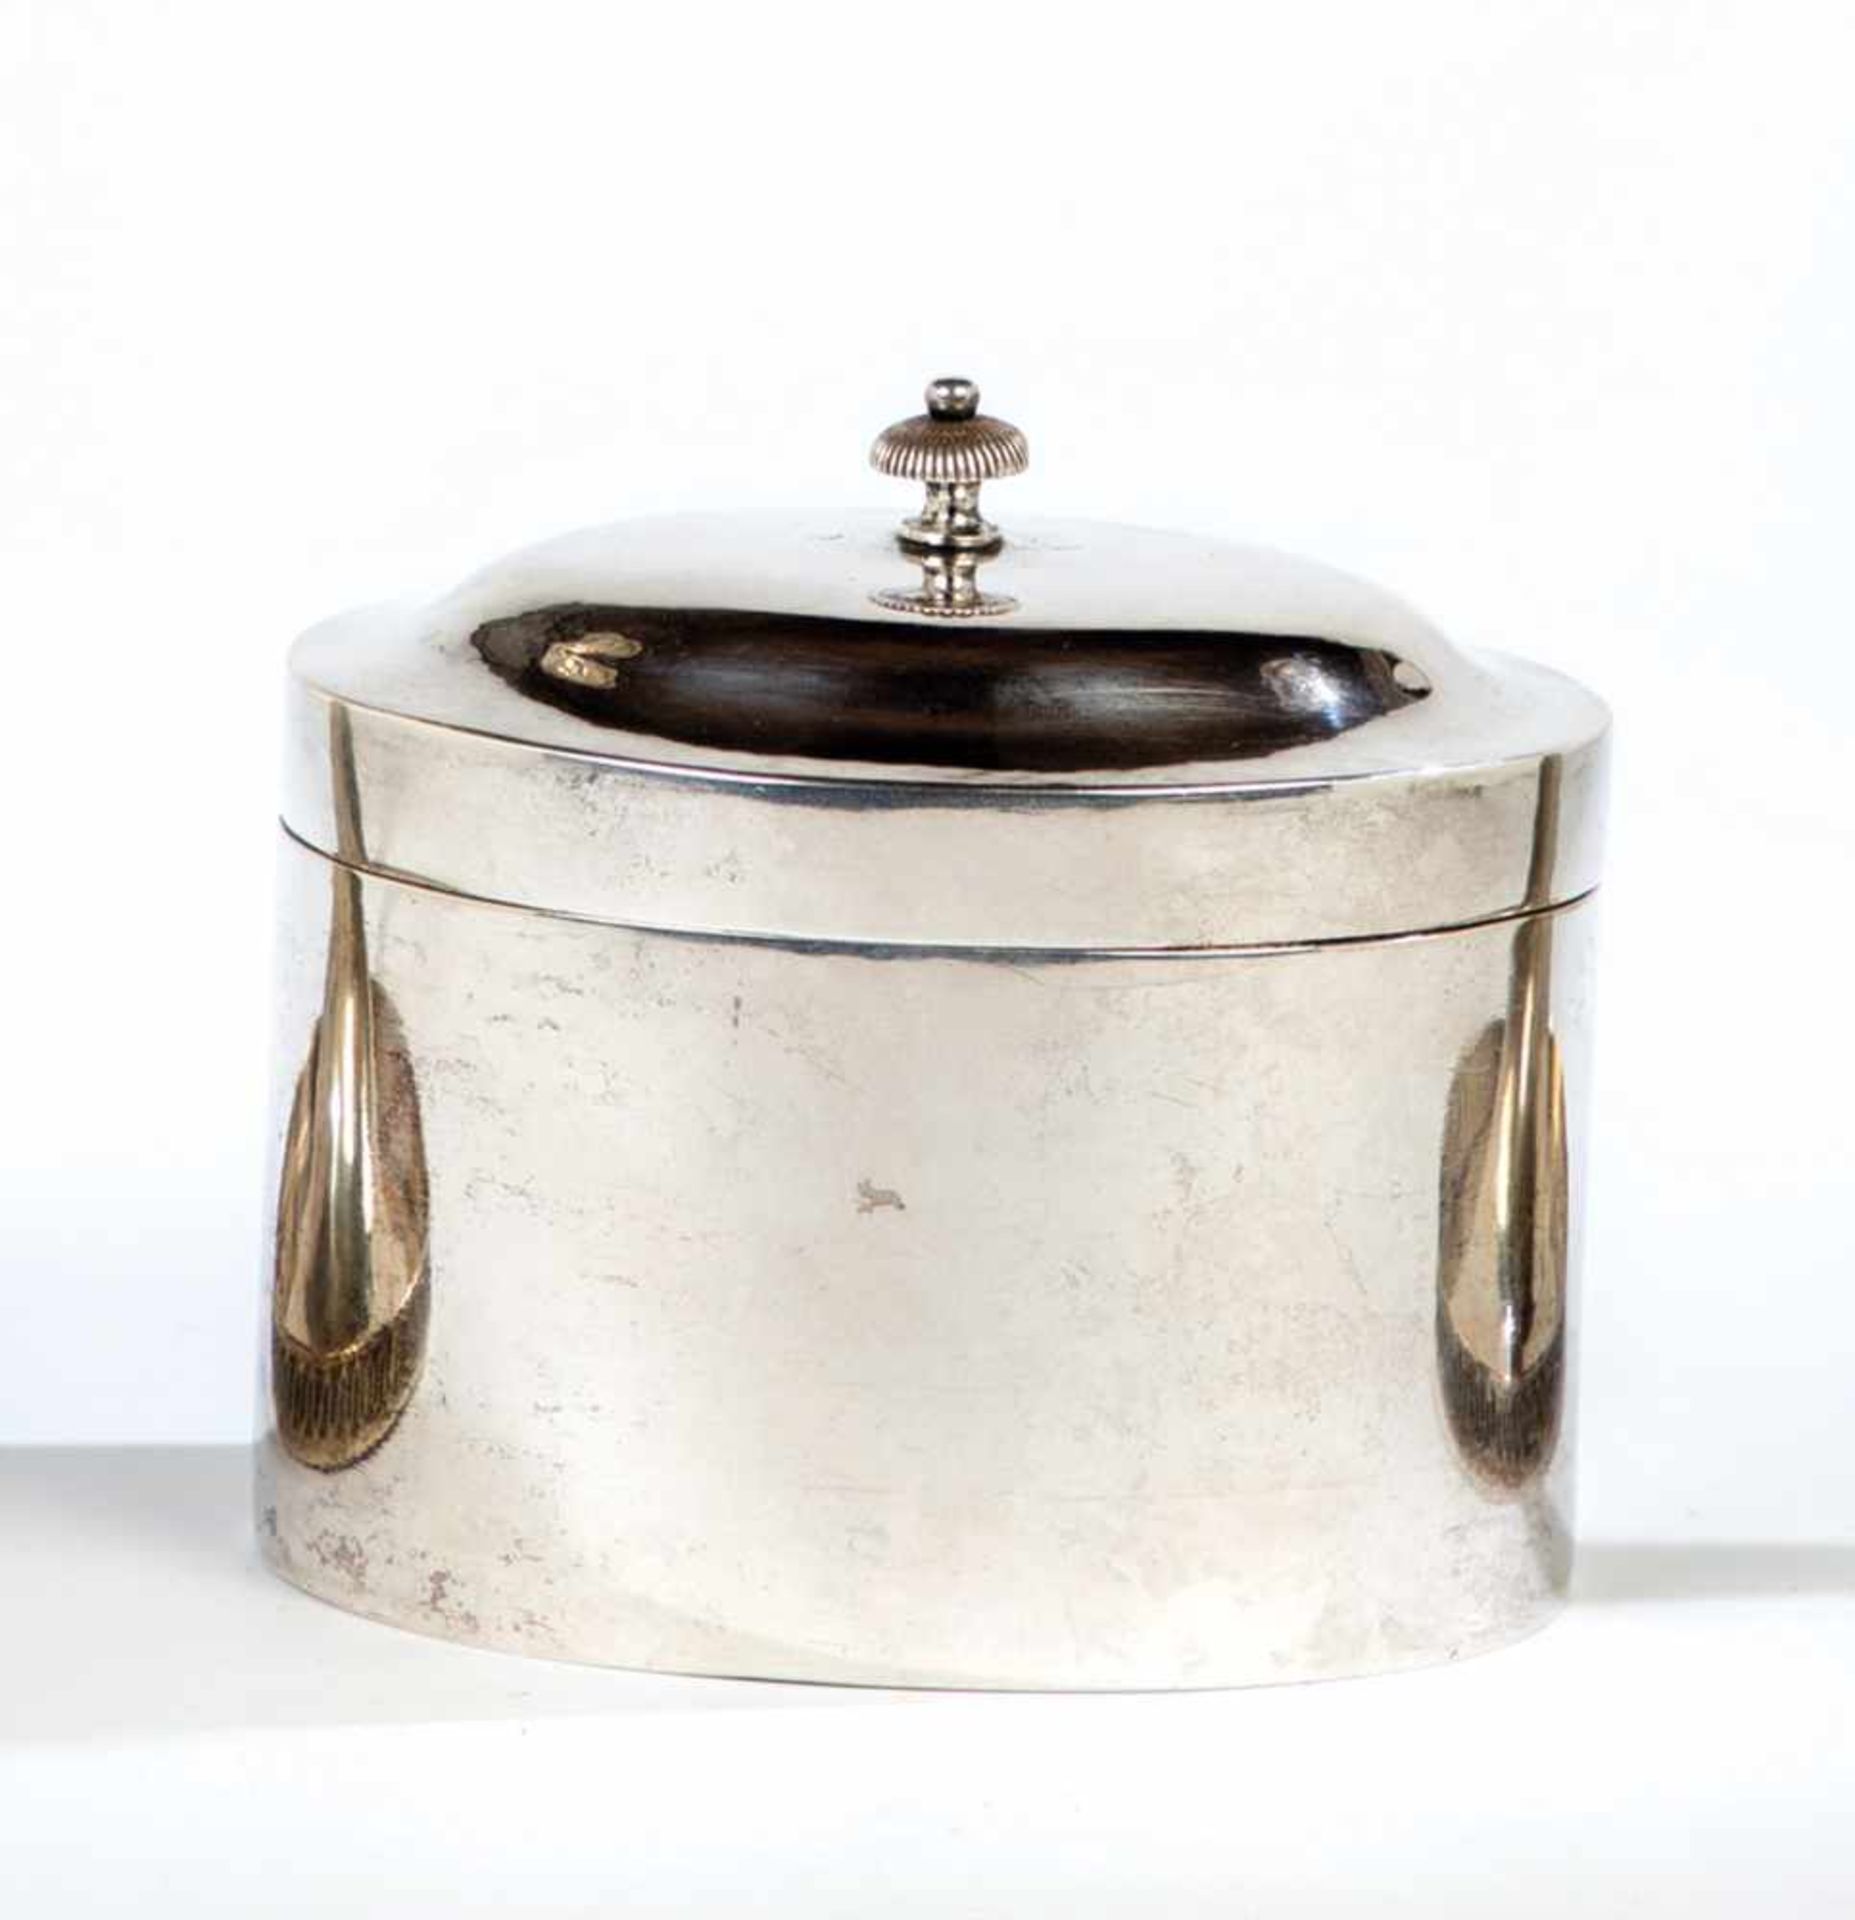 A silver sugar bowl. Austria, Vienna, 1816. Oval body. Stamped with assayer's mark ''1816''and